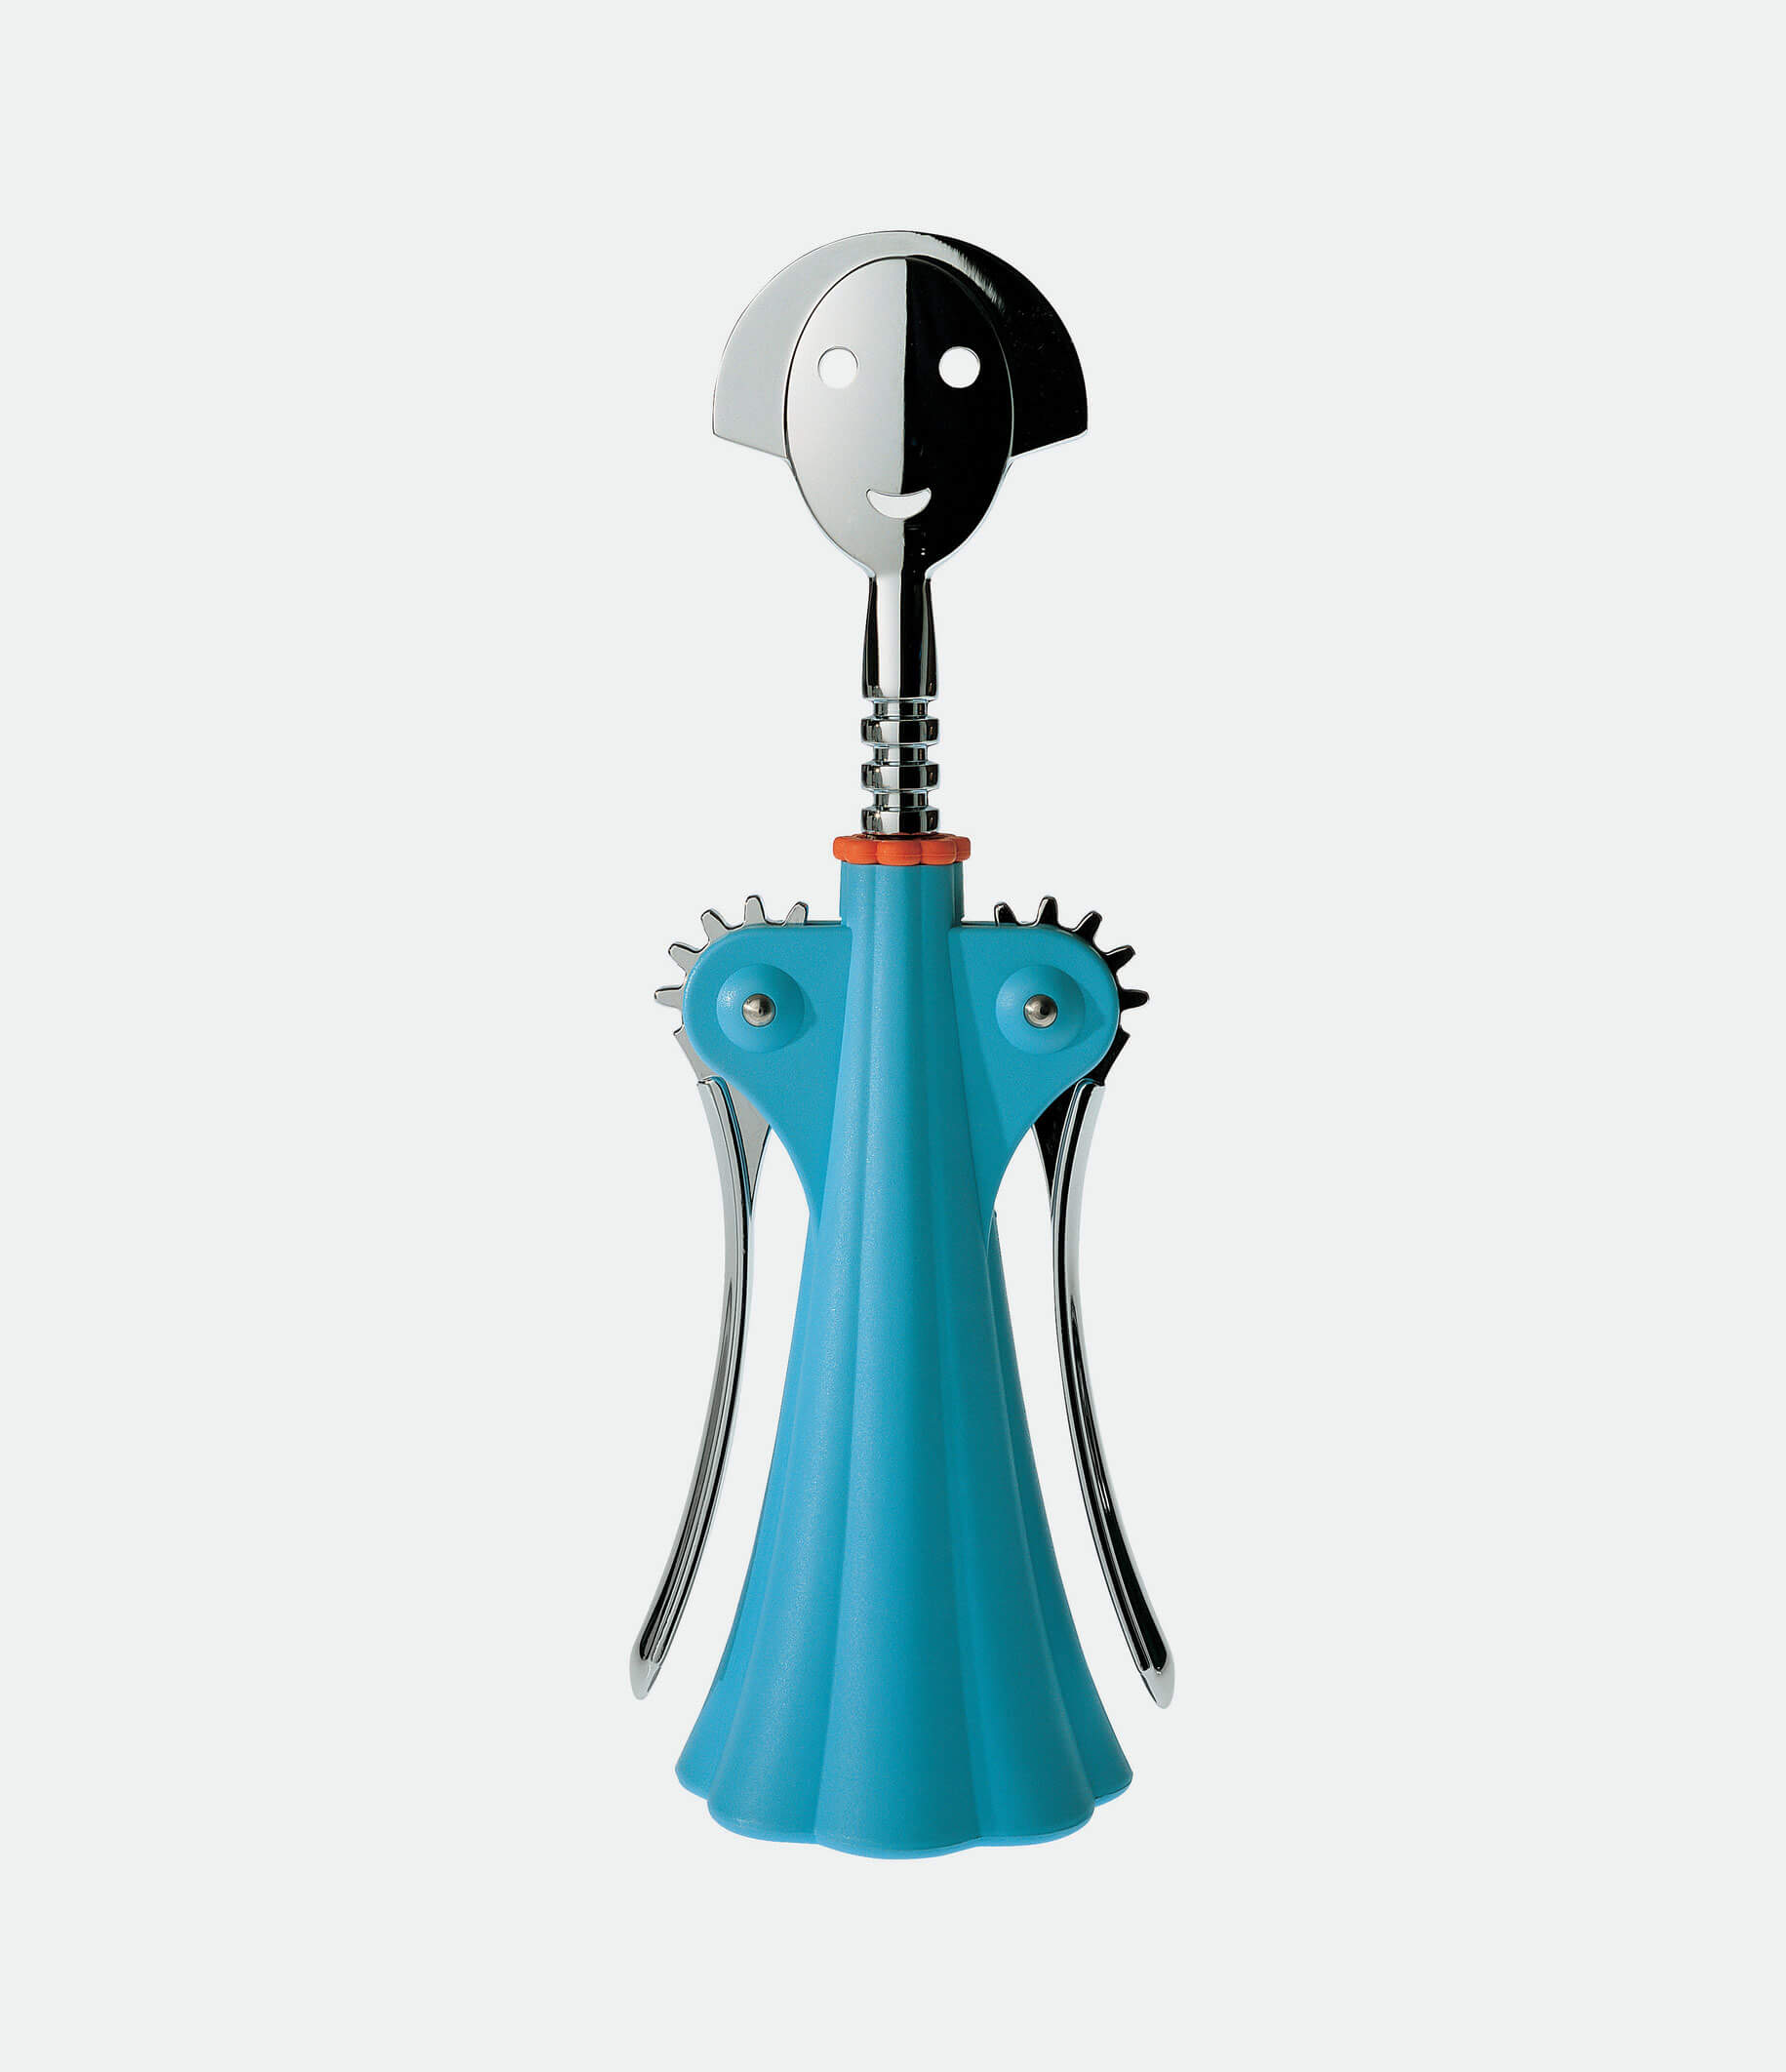 INNOVATION: Alessi – A Family Business Designing the Future